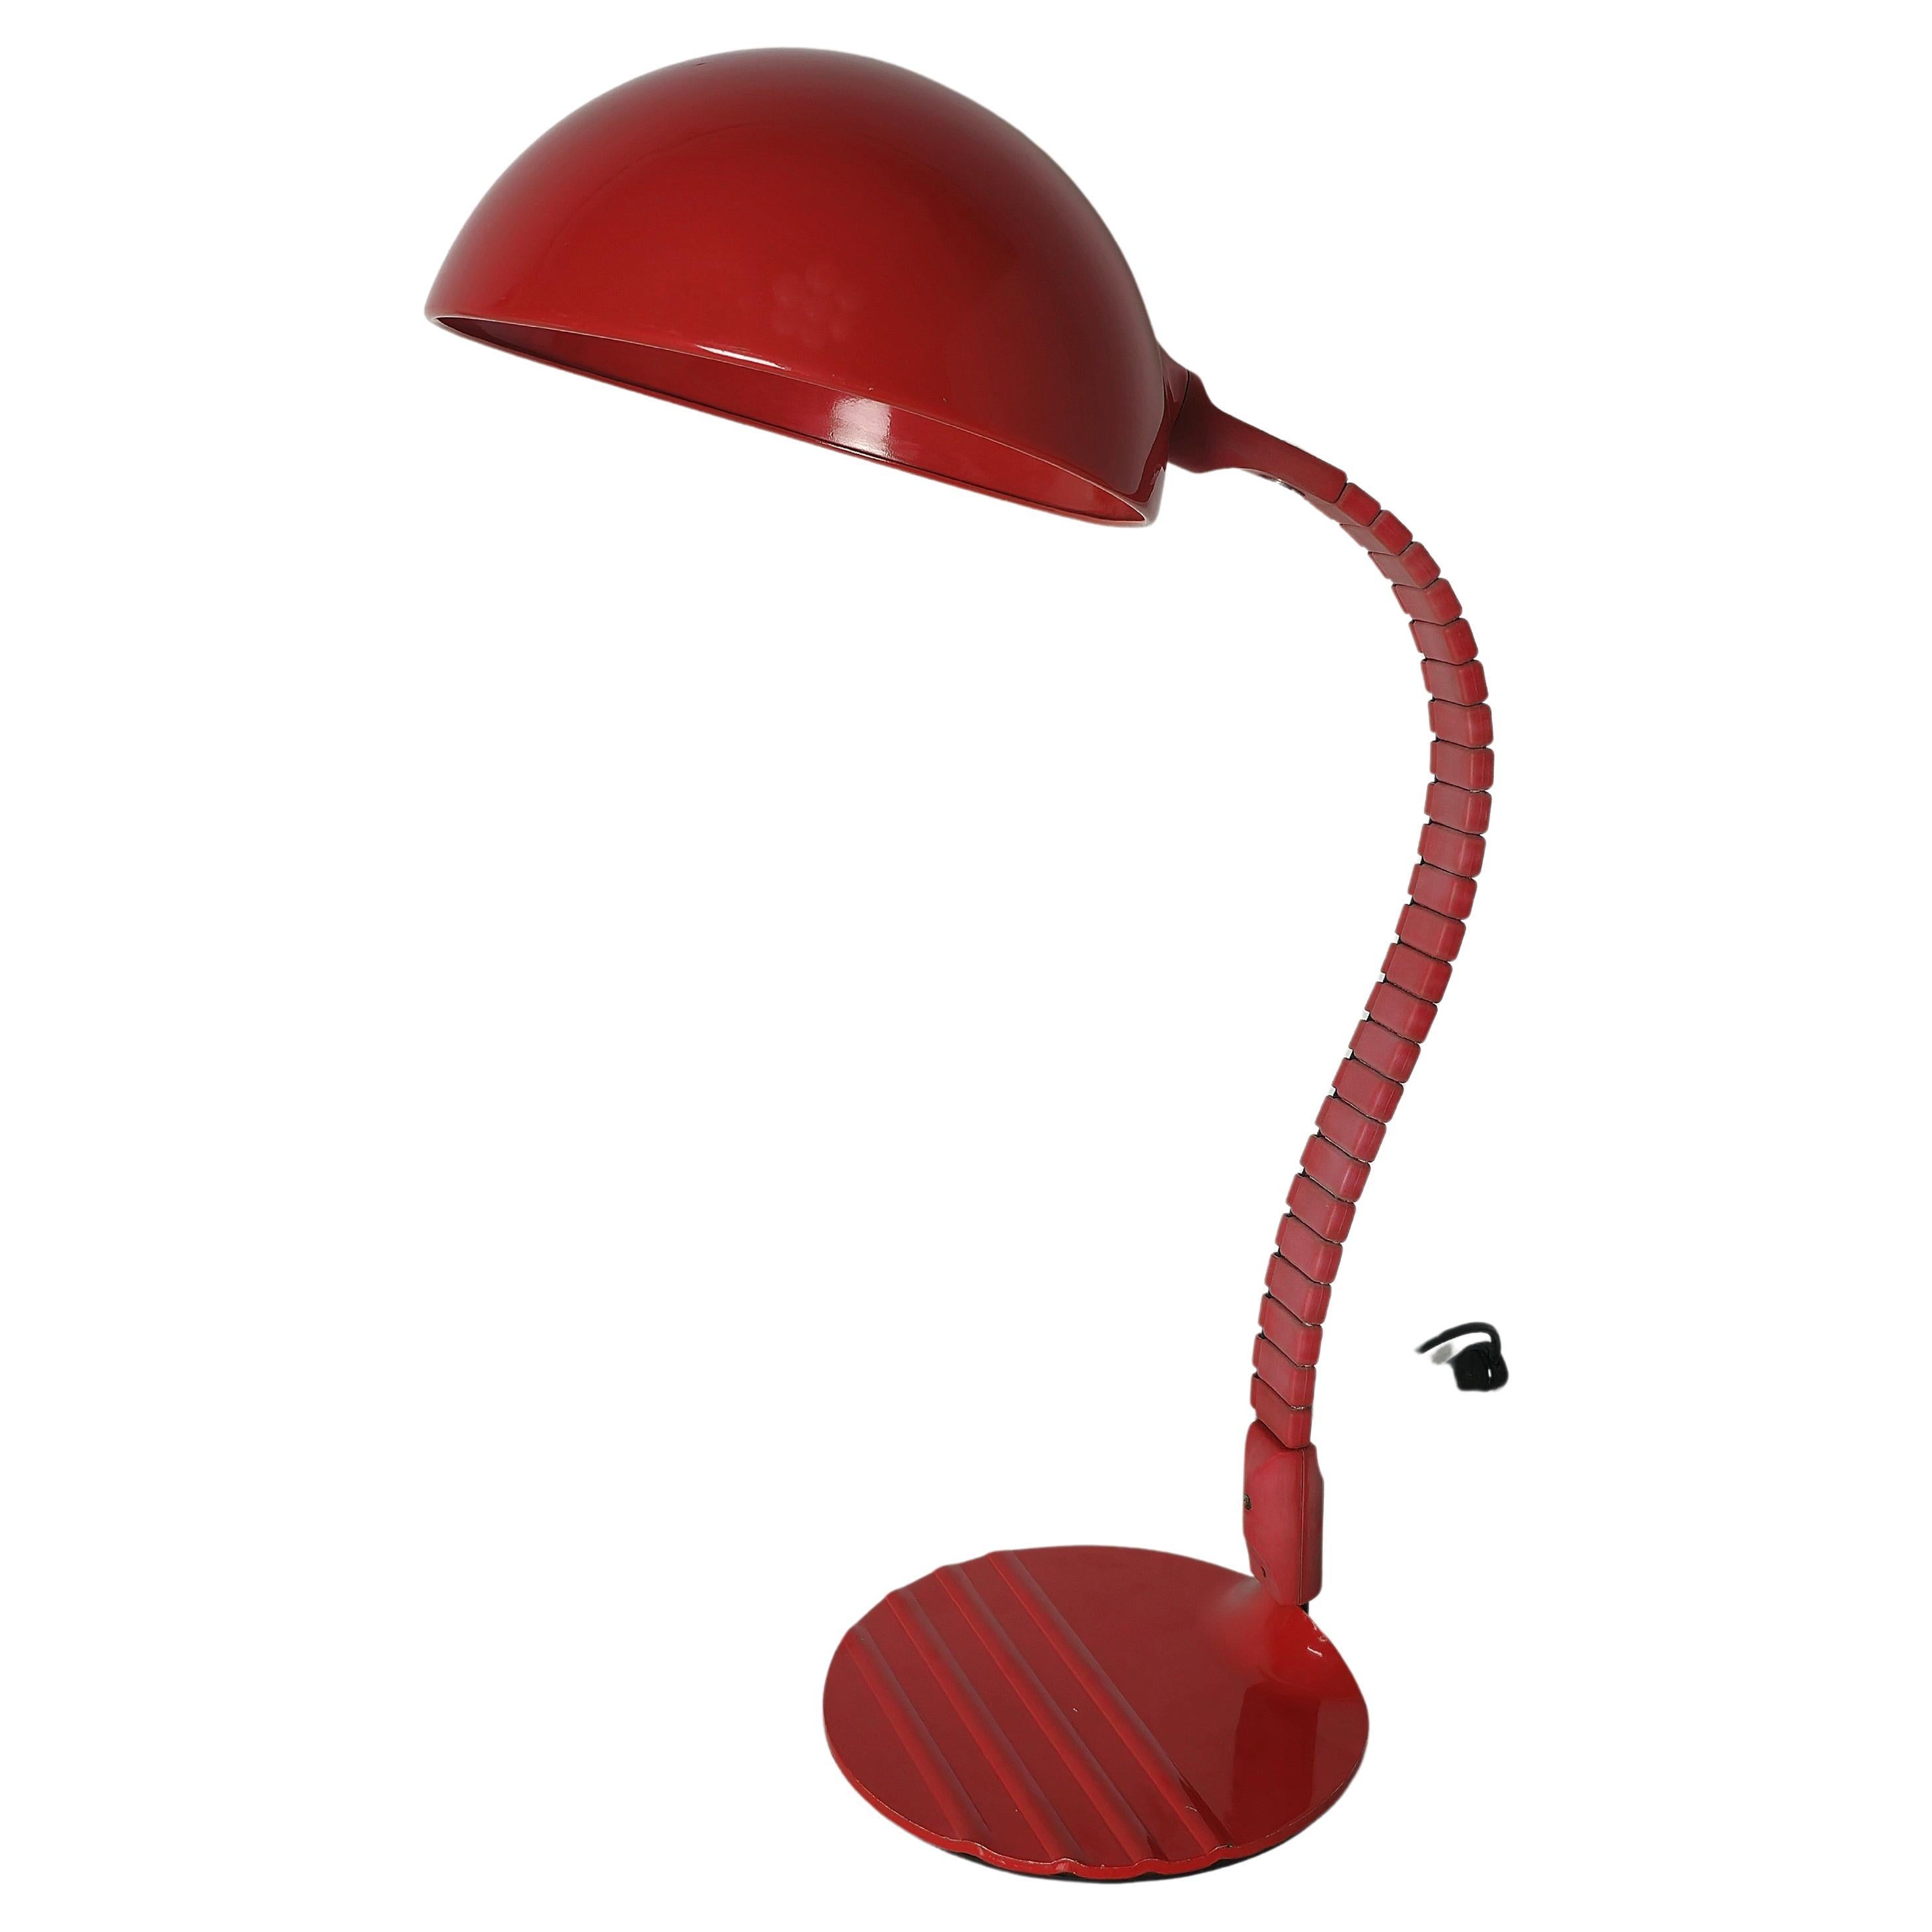 Table lamp made with aluminum diffuser, flexible plasticized arm and circular base in red enamelled metal. Elio Martinelli, Martinelli Luce mod.660, Italy 70s.


Note: We try to offer our customers an excellent service even in shipments all over the